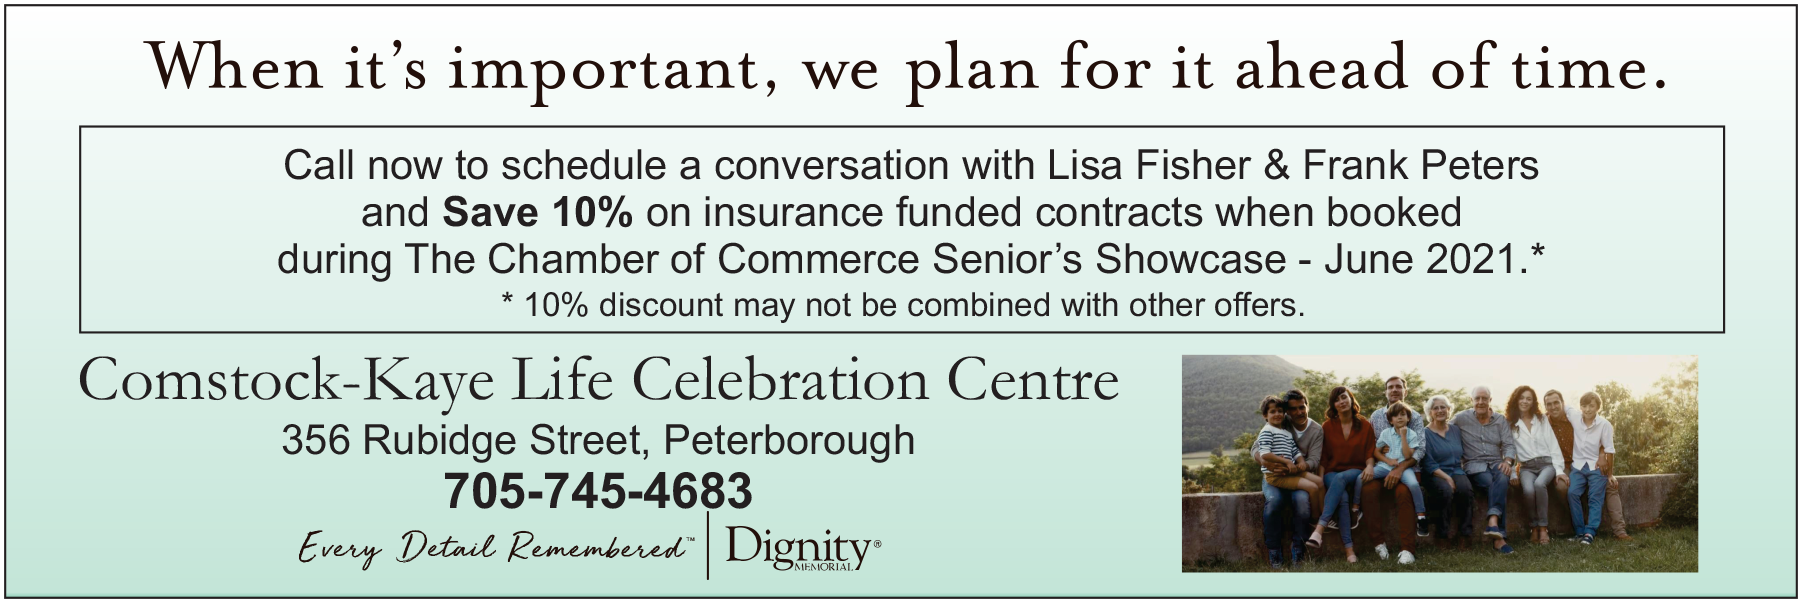 Comstock-Kaye Life Celebration Centre - When it's important, we plan ahead for it. Call now to schedule a conversation with Lisa Fisher & Frank Peters and Save 10% on insurance funded contracts when booked during the Chamber of Commerce Senior's Showcase - June 2021. 10% discount may not be combined with other offers. 356 Rubidge Street, Peterborough 705-745-4683